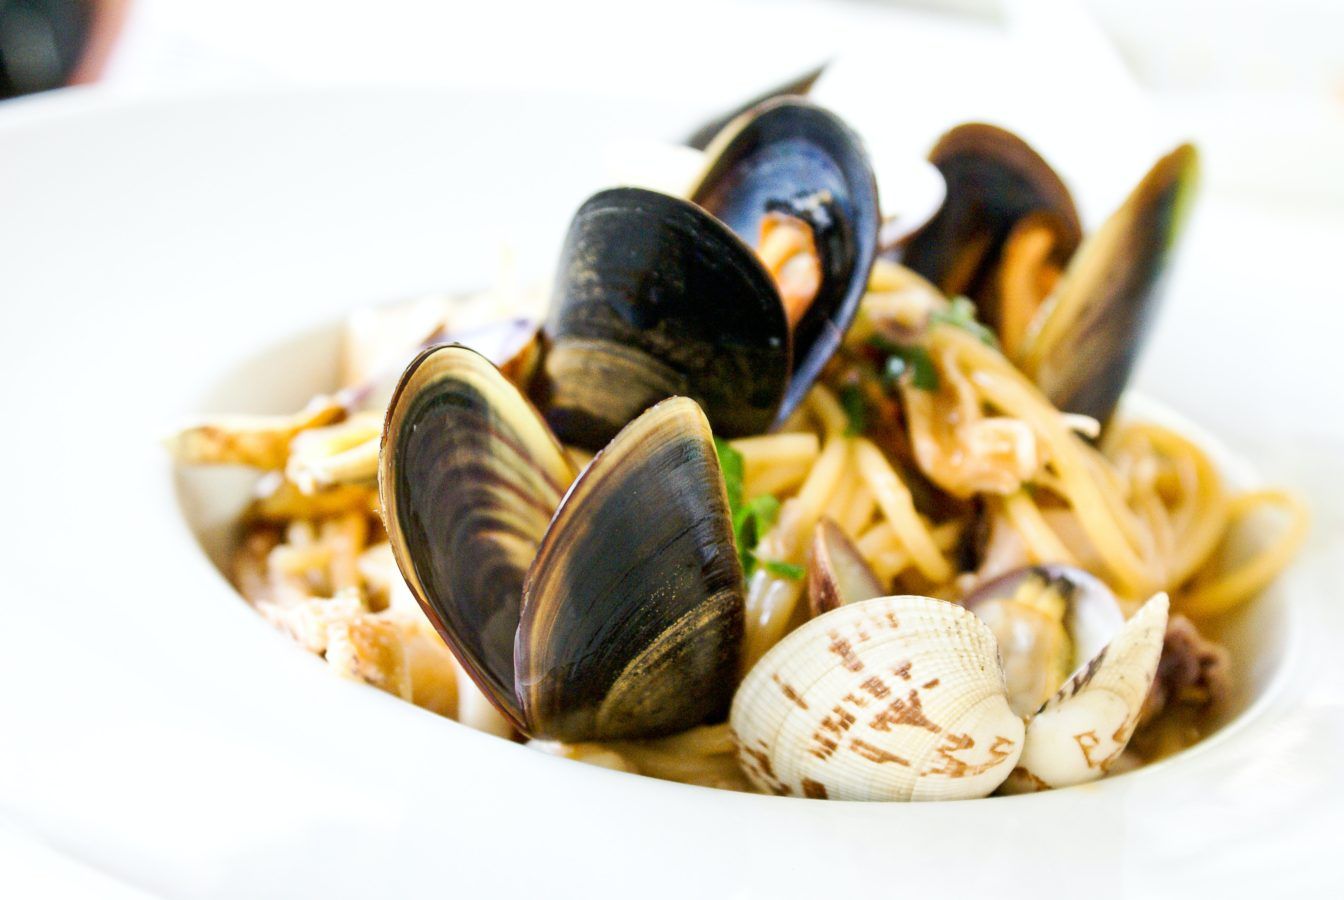 When you eat mussels, you’re also consuming… microplastics